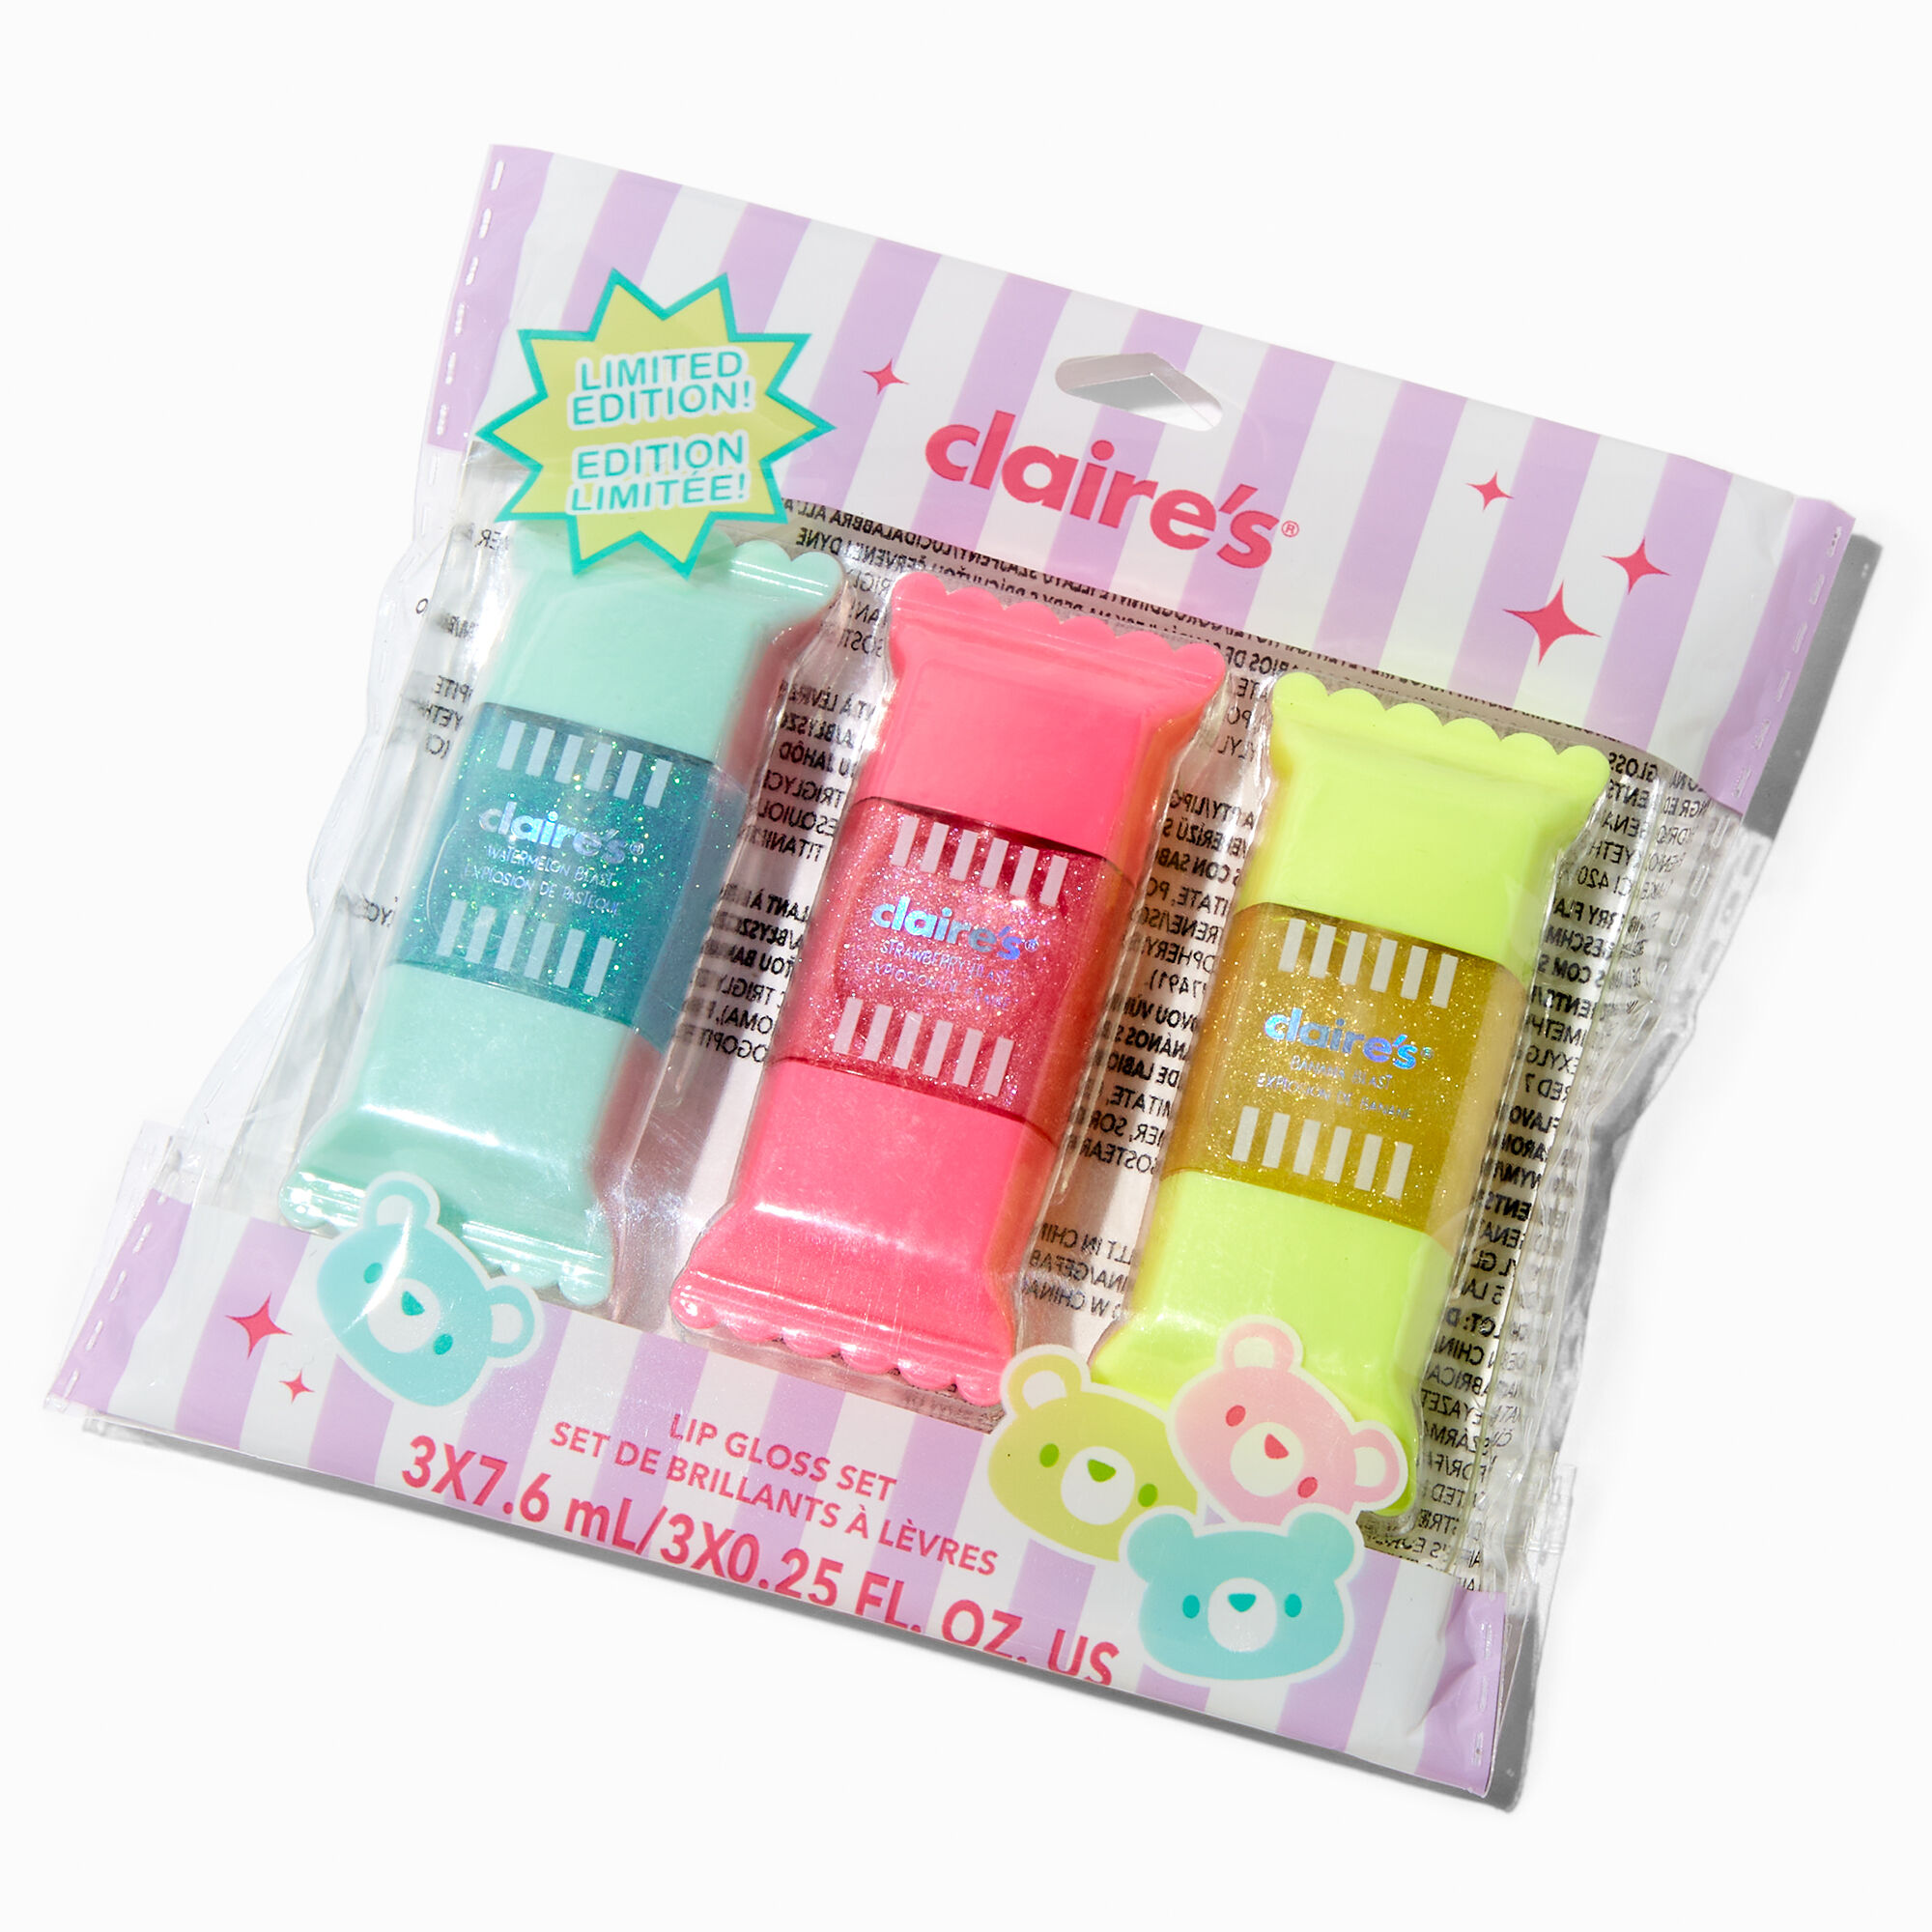 View Claires Bubblegum Candy Limited Edition Lip Gloss Set 3 Pack information